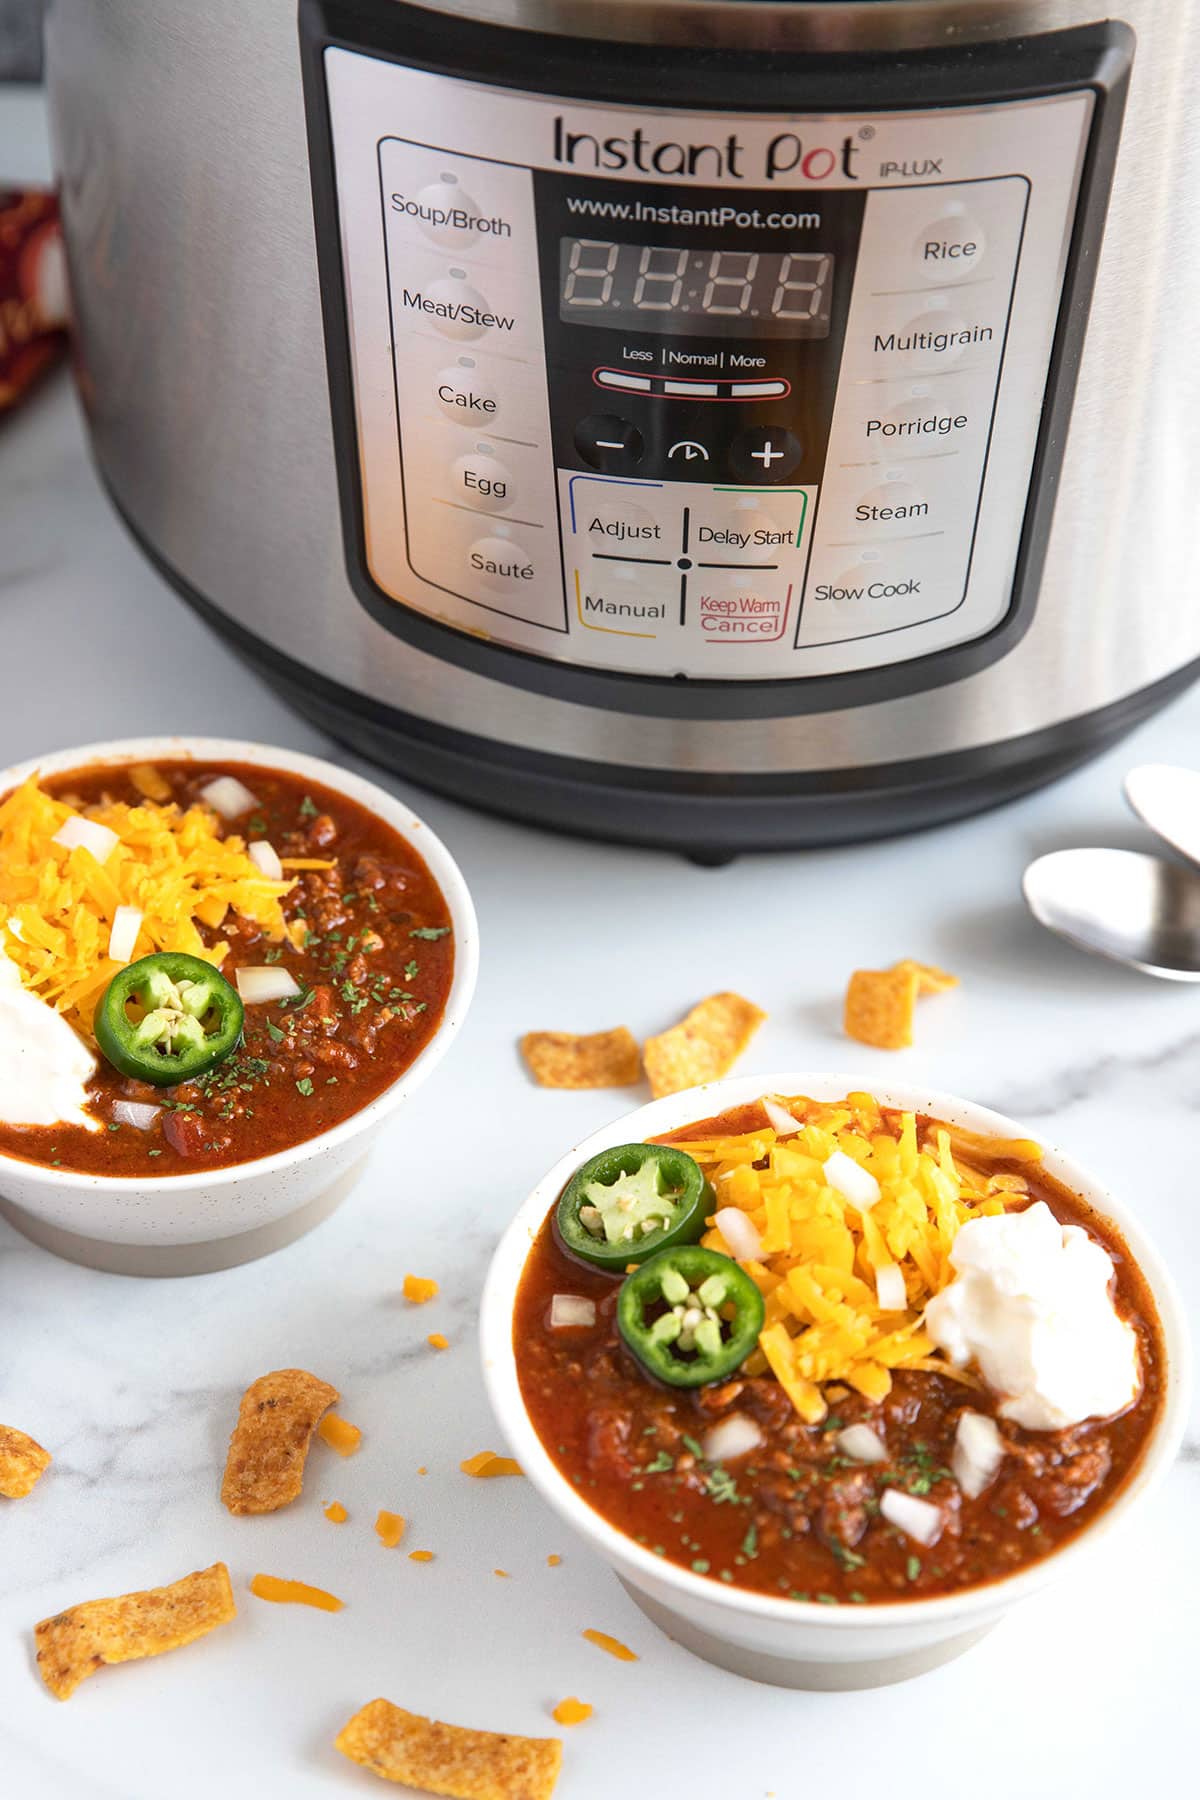 Bowls of chili sitting next to an Instant Pot pressure cooker.